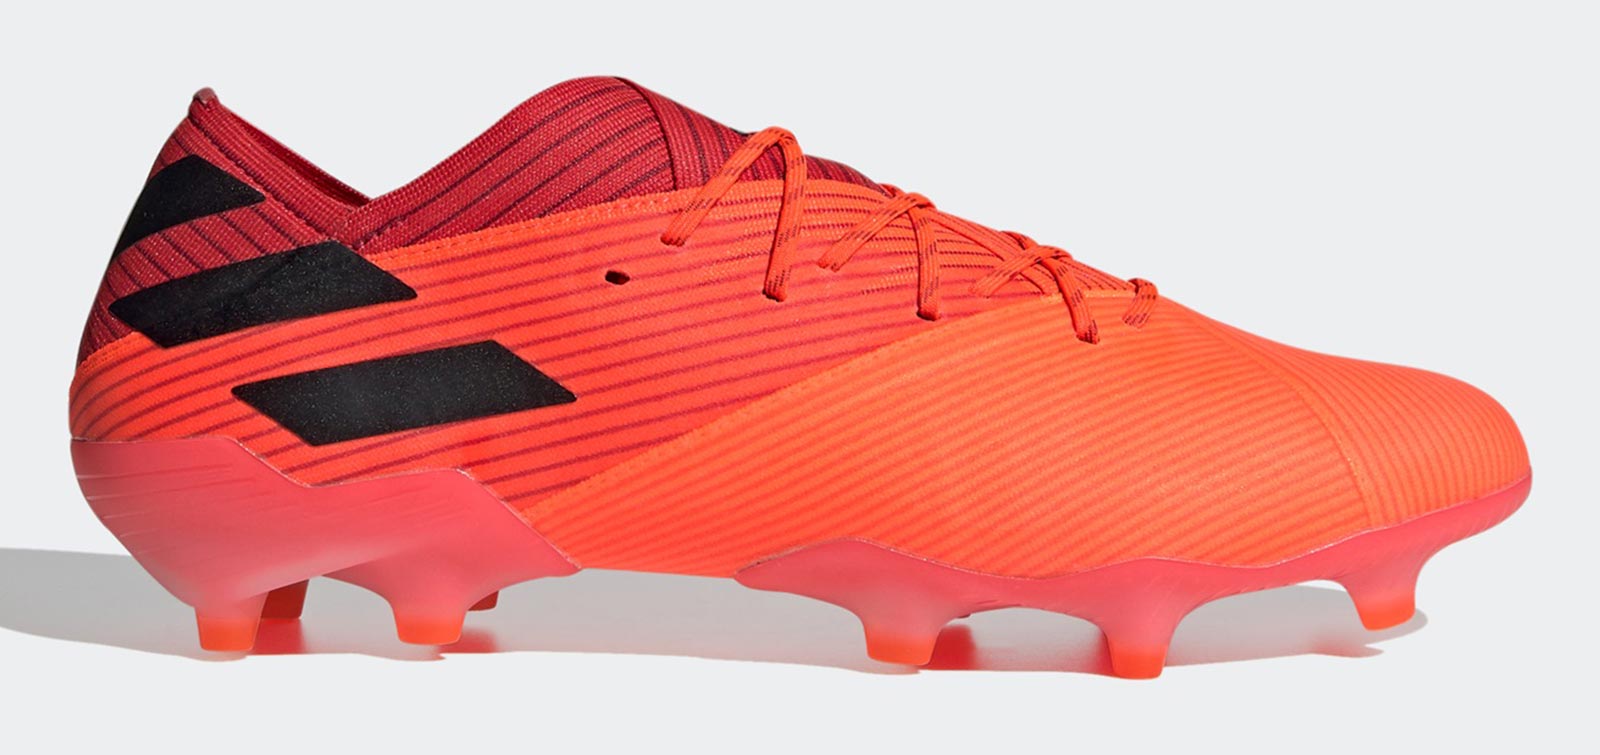 messi soccer shoes 2020